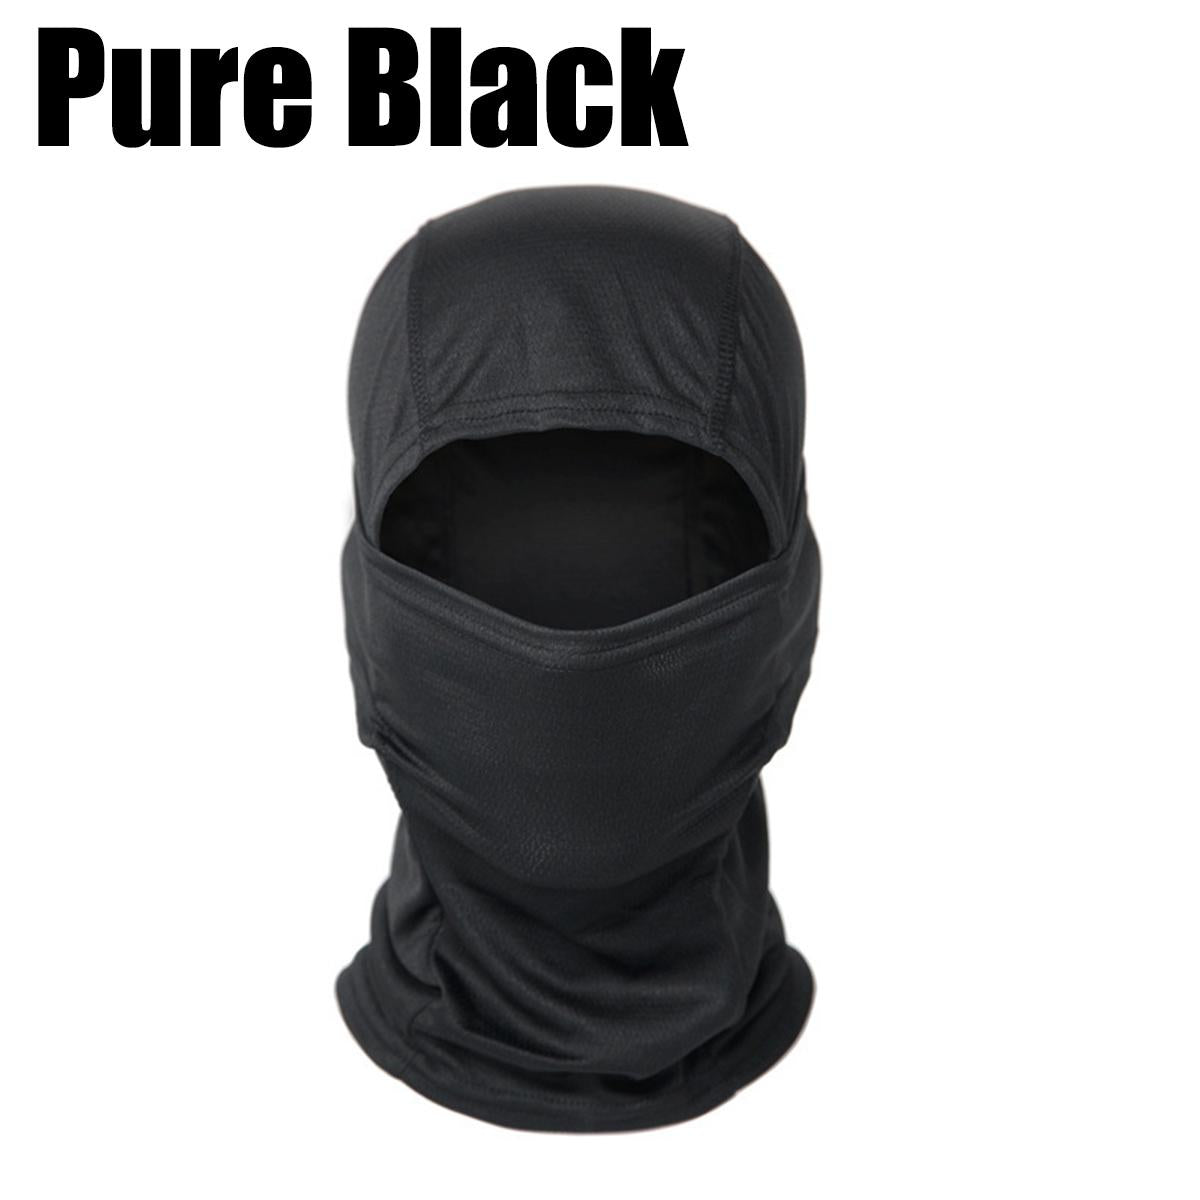 Balaclava Tactical Military Camouflage Face Mask